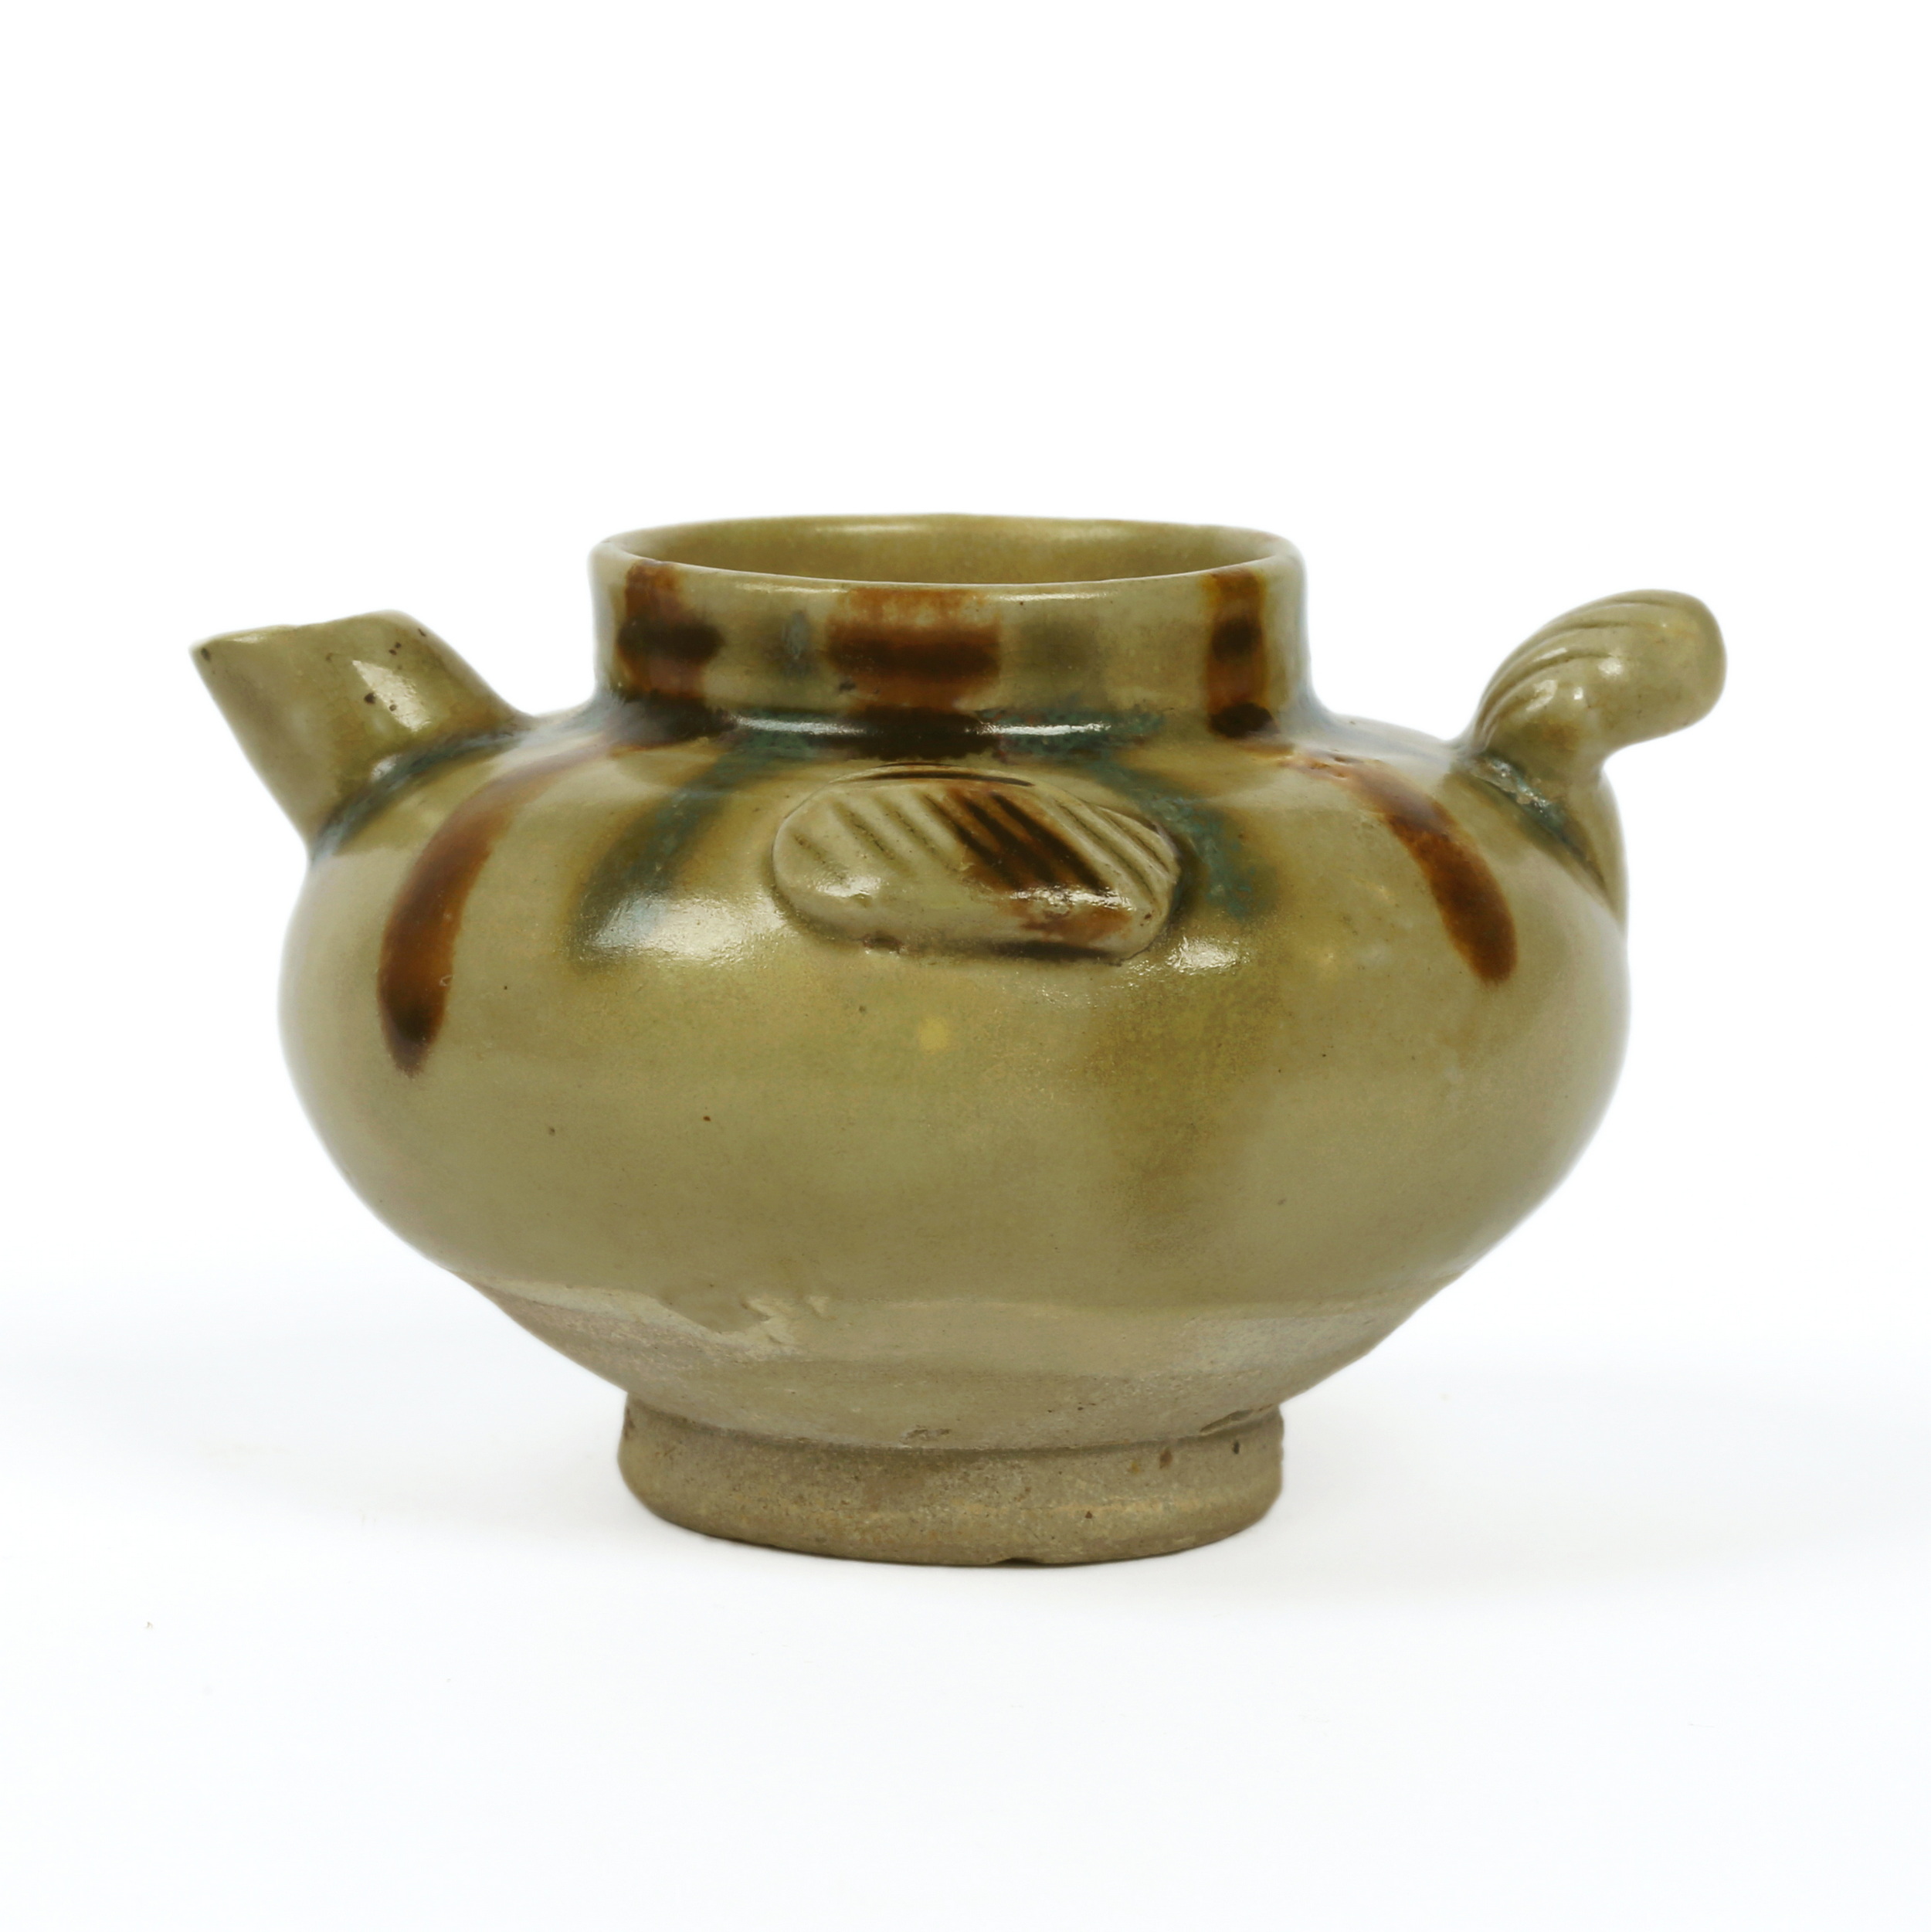 a changsha kiln water container,tang dynasty 唐代长沙窑砚滴